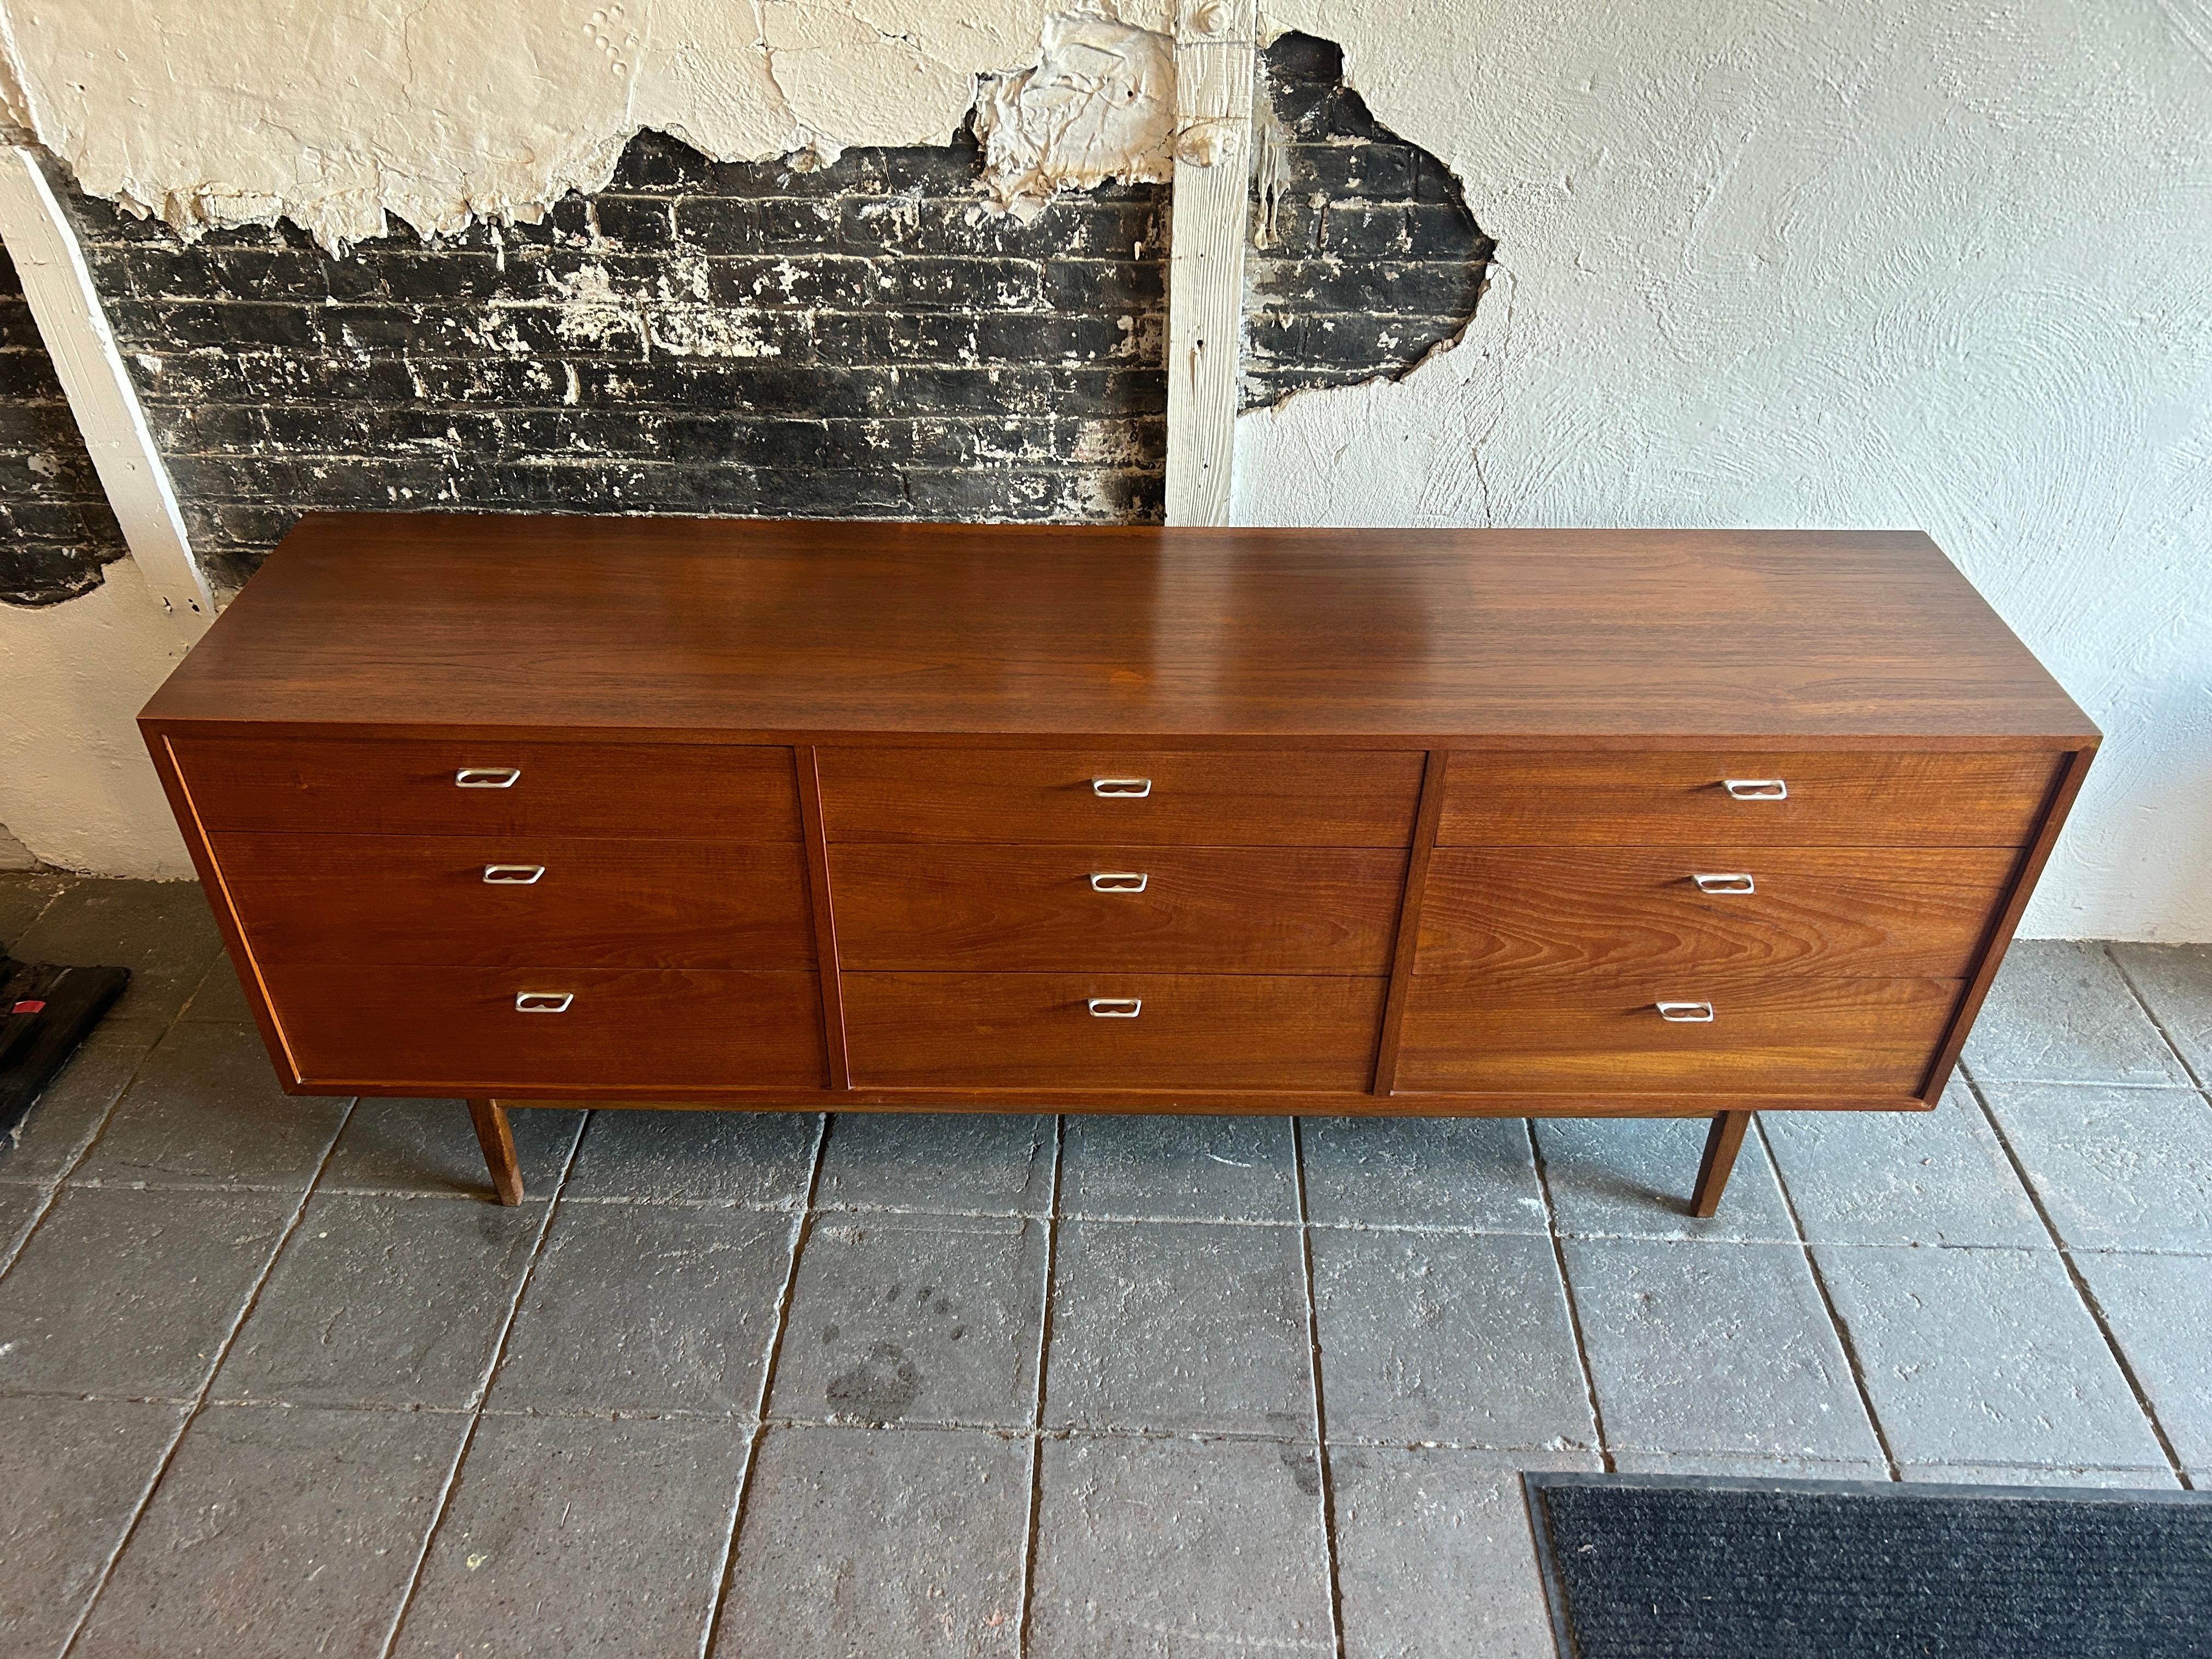 American Mid-Century Modern low 9 drawer walnut dresser with aluminum two finger pulls. Really Good Design and clean inside and out in good vintage condition. Walnut veneer dressers with solid wood drawers and dovetail joints. All drawers are clean